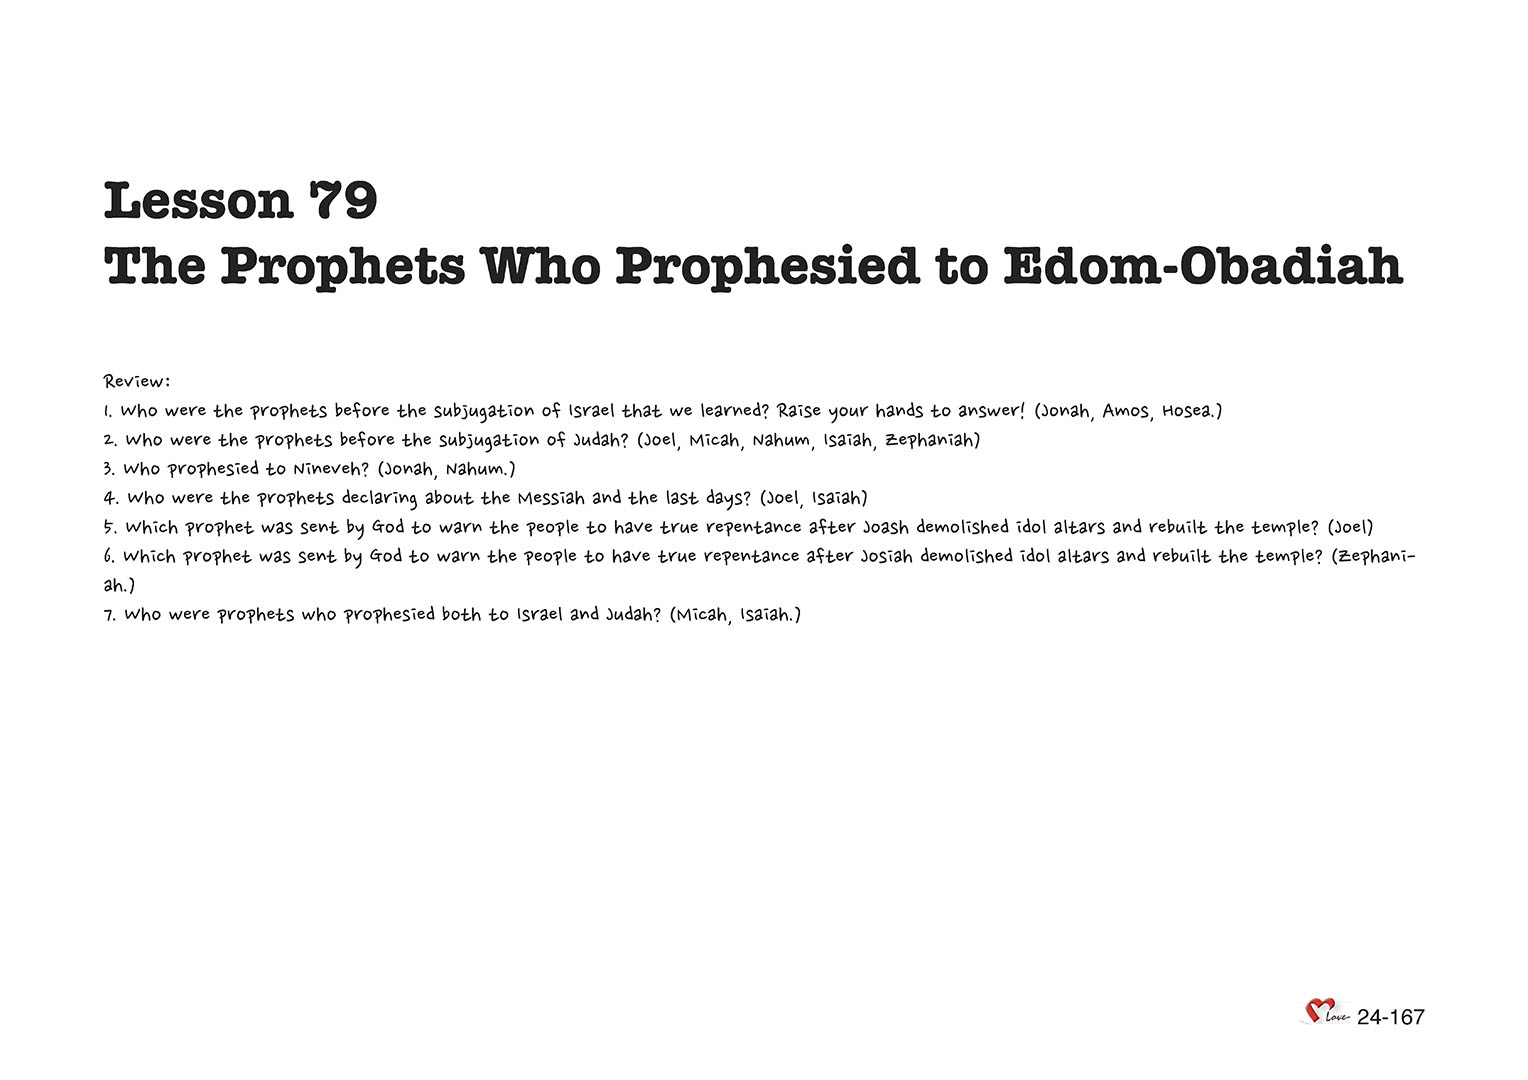 Chapter 24 - Lesson 79 - The Prophets Who Prophesied to Edom-Obadiah